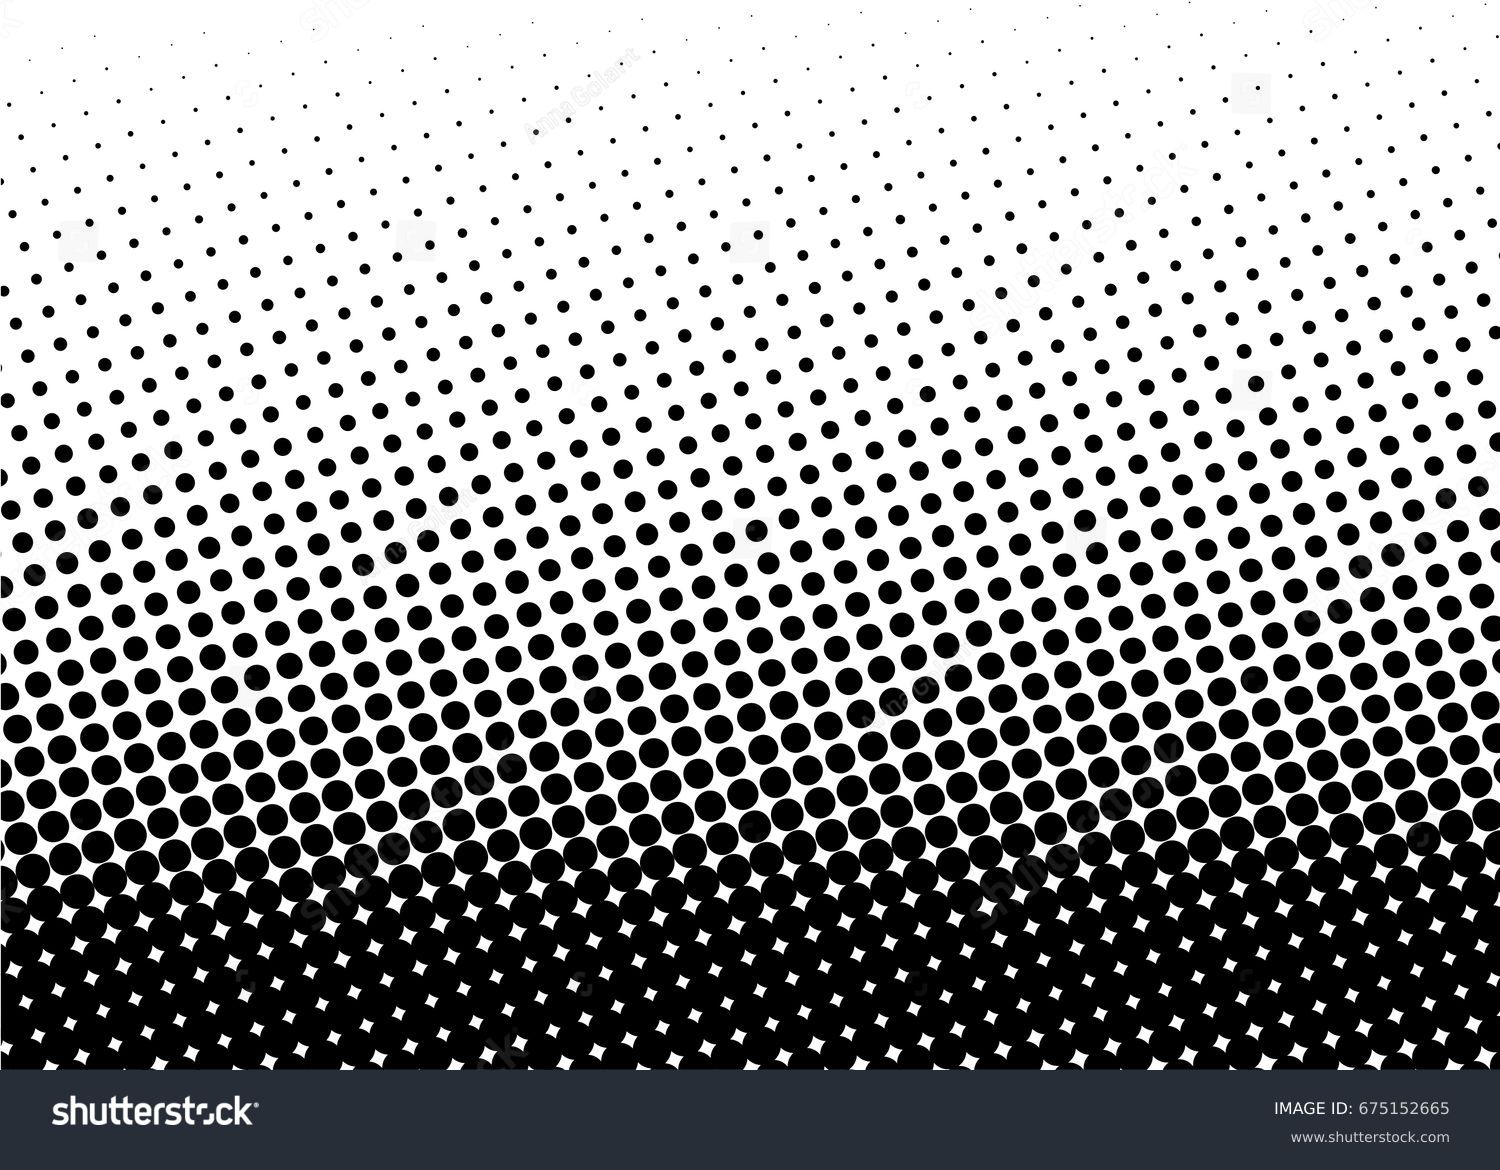 Comic dotted backdrop with circles, design element for Wallpaper